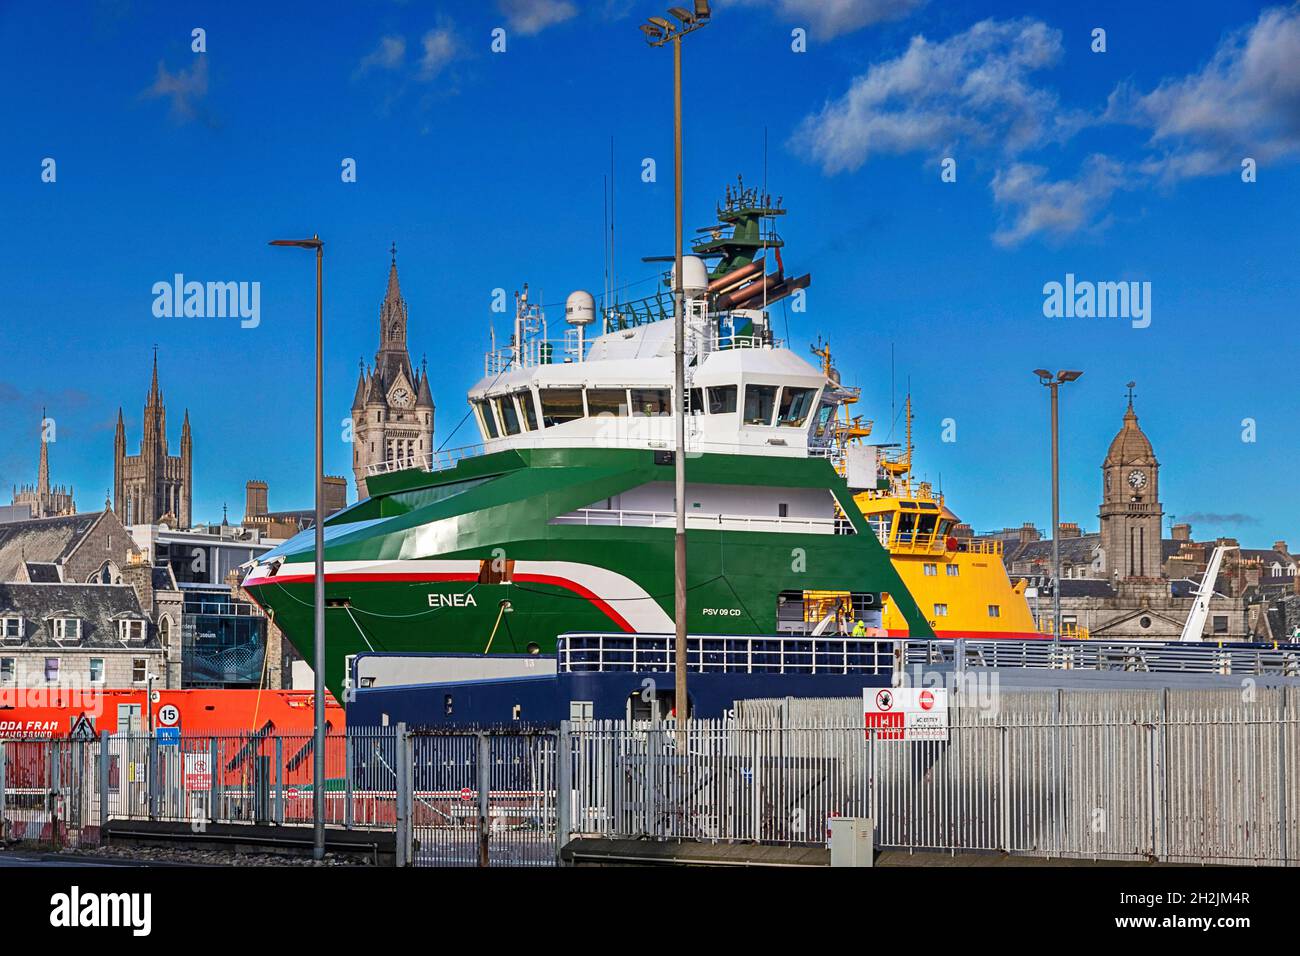 ABERDEEN CITY SCOTLAND CITY SKYLINE A SPIRE THE MITCHELL TOWER AND CLOCK FACE OF ABERDEEN TOWN HOUSE SEEN FROM HARBOUR AND THE OIL RIG VESSEL ENEA Stock Photo